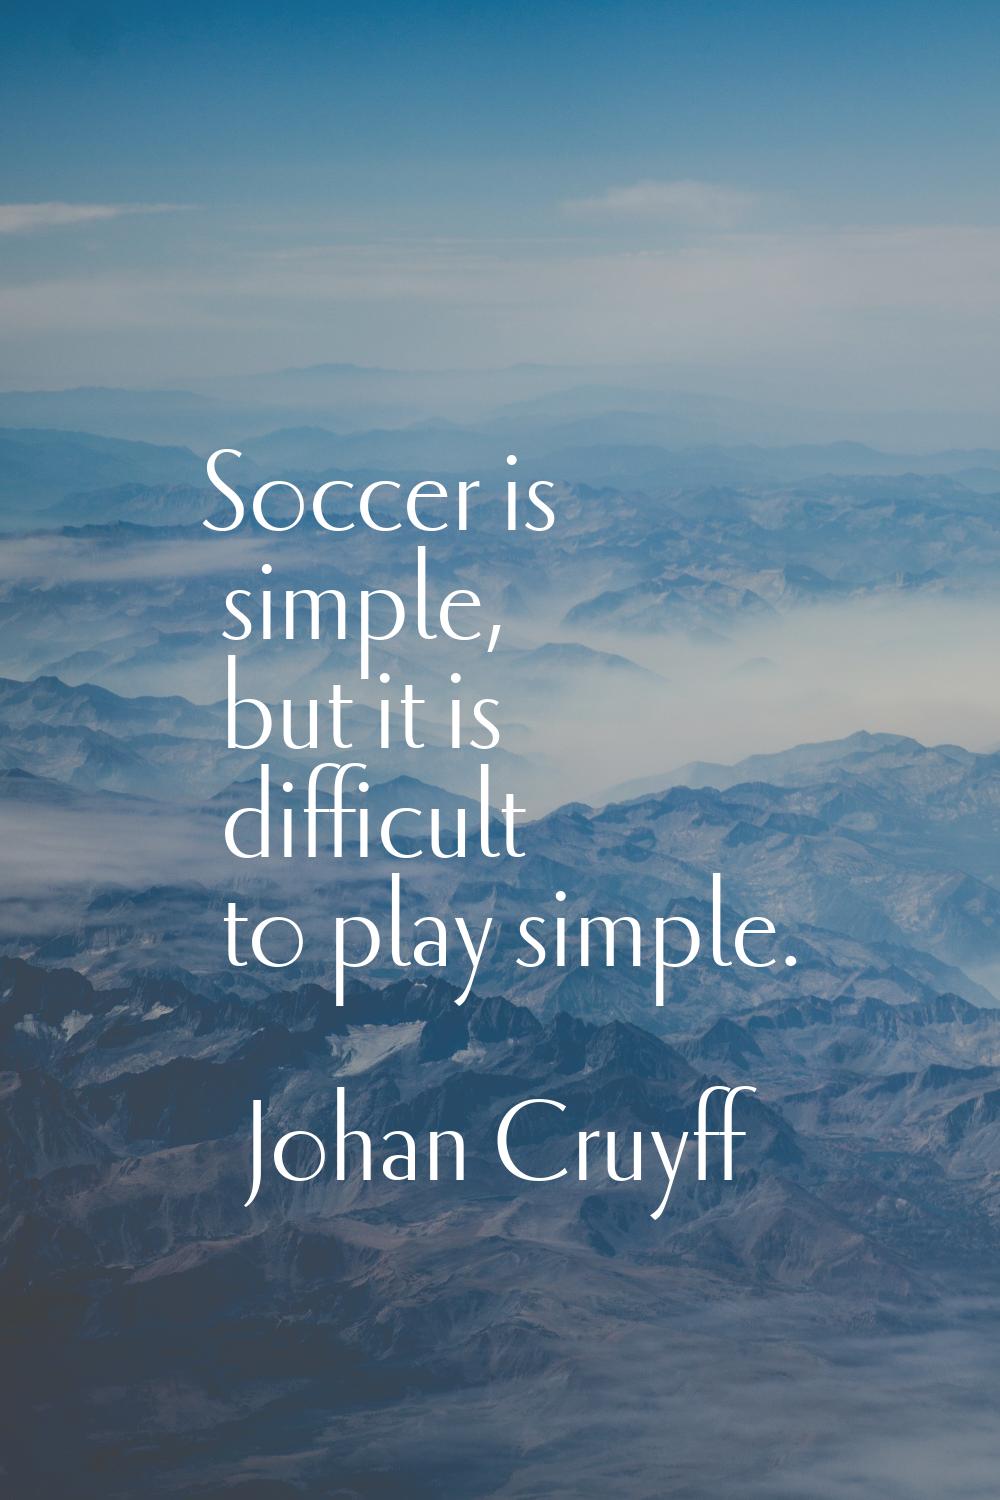 Soccer is simple, but it is difficult to play simple.